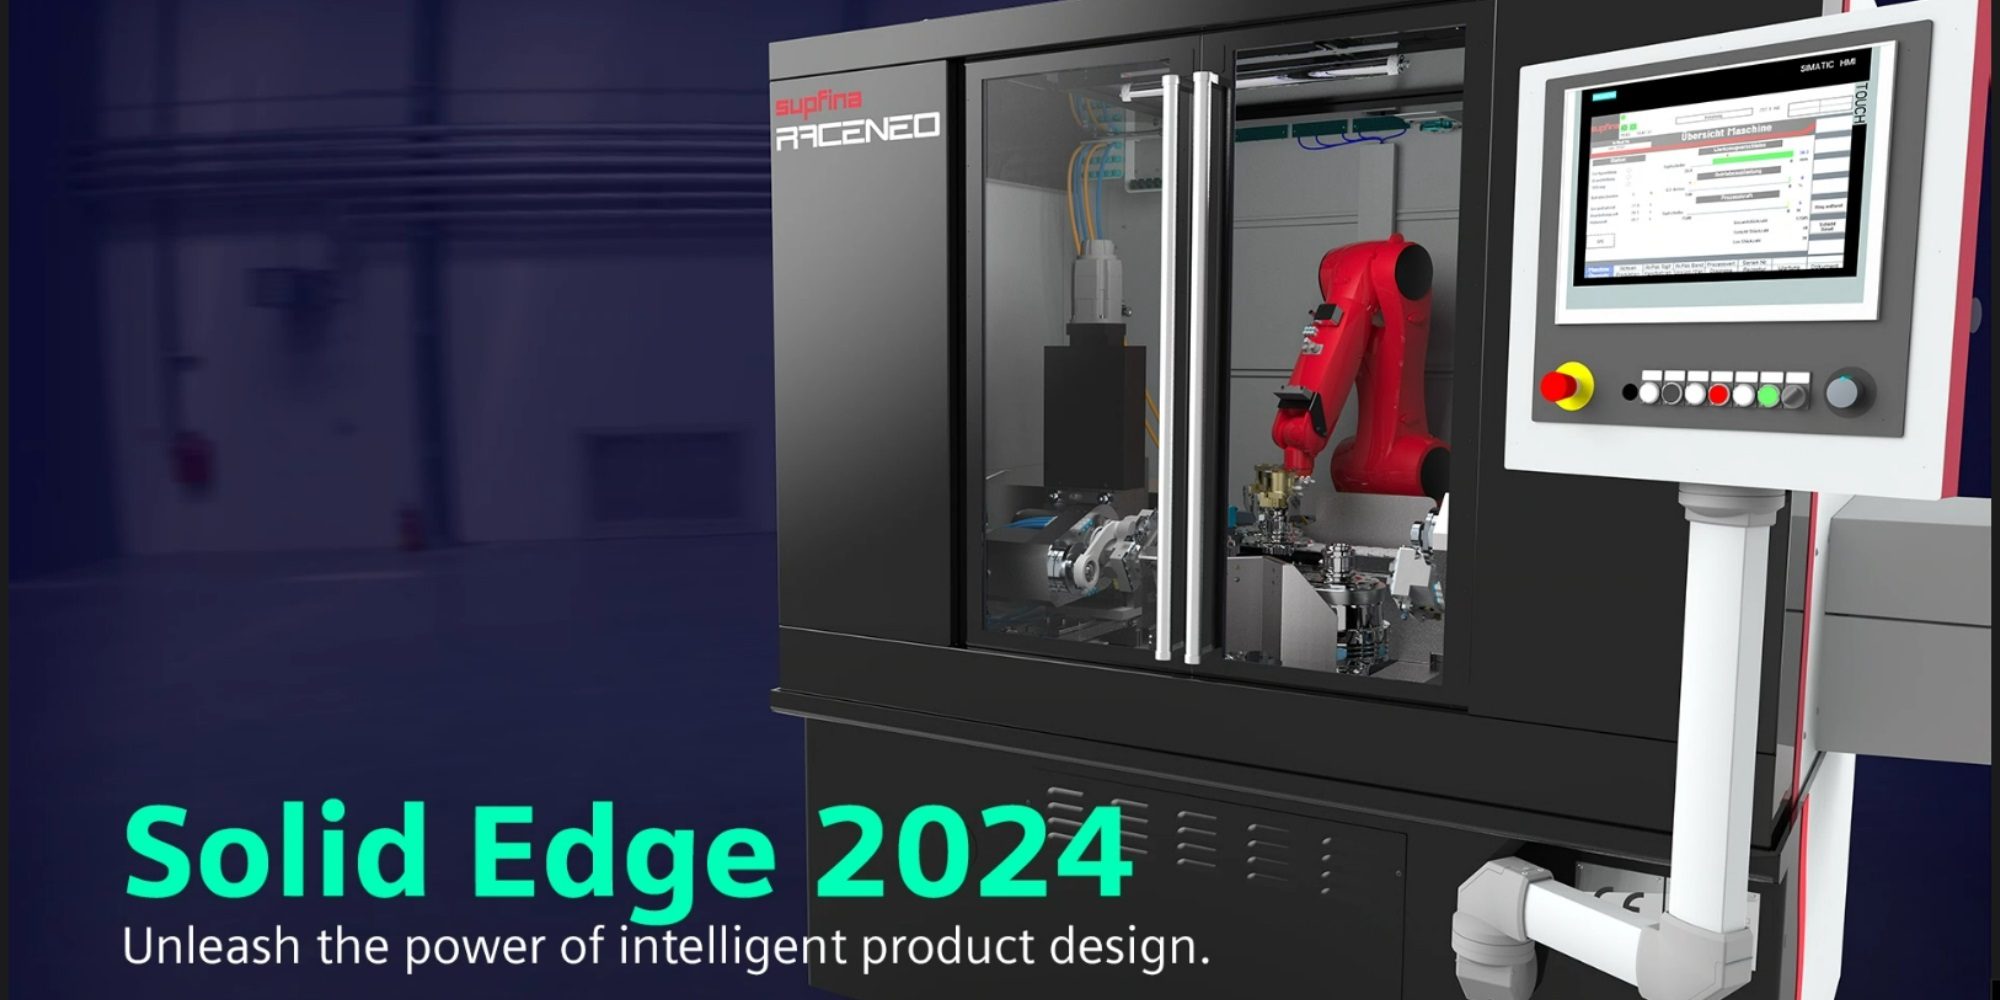 solid edge 2024, unleash the power of intelligent product design